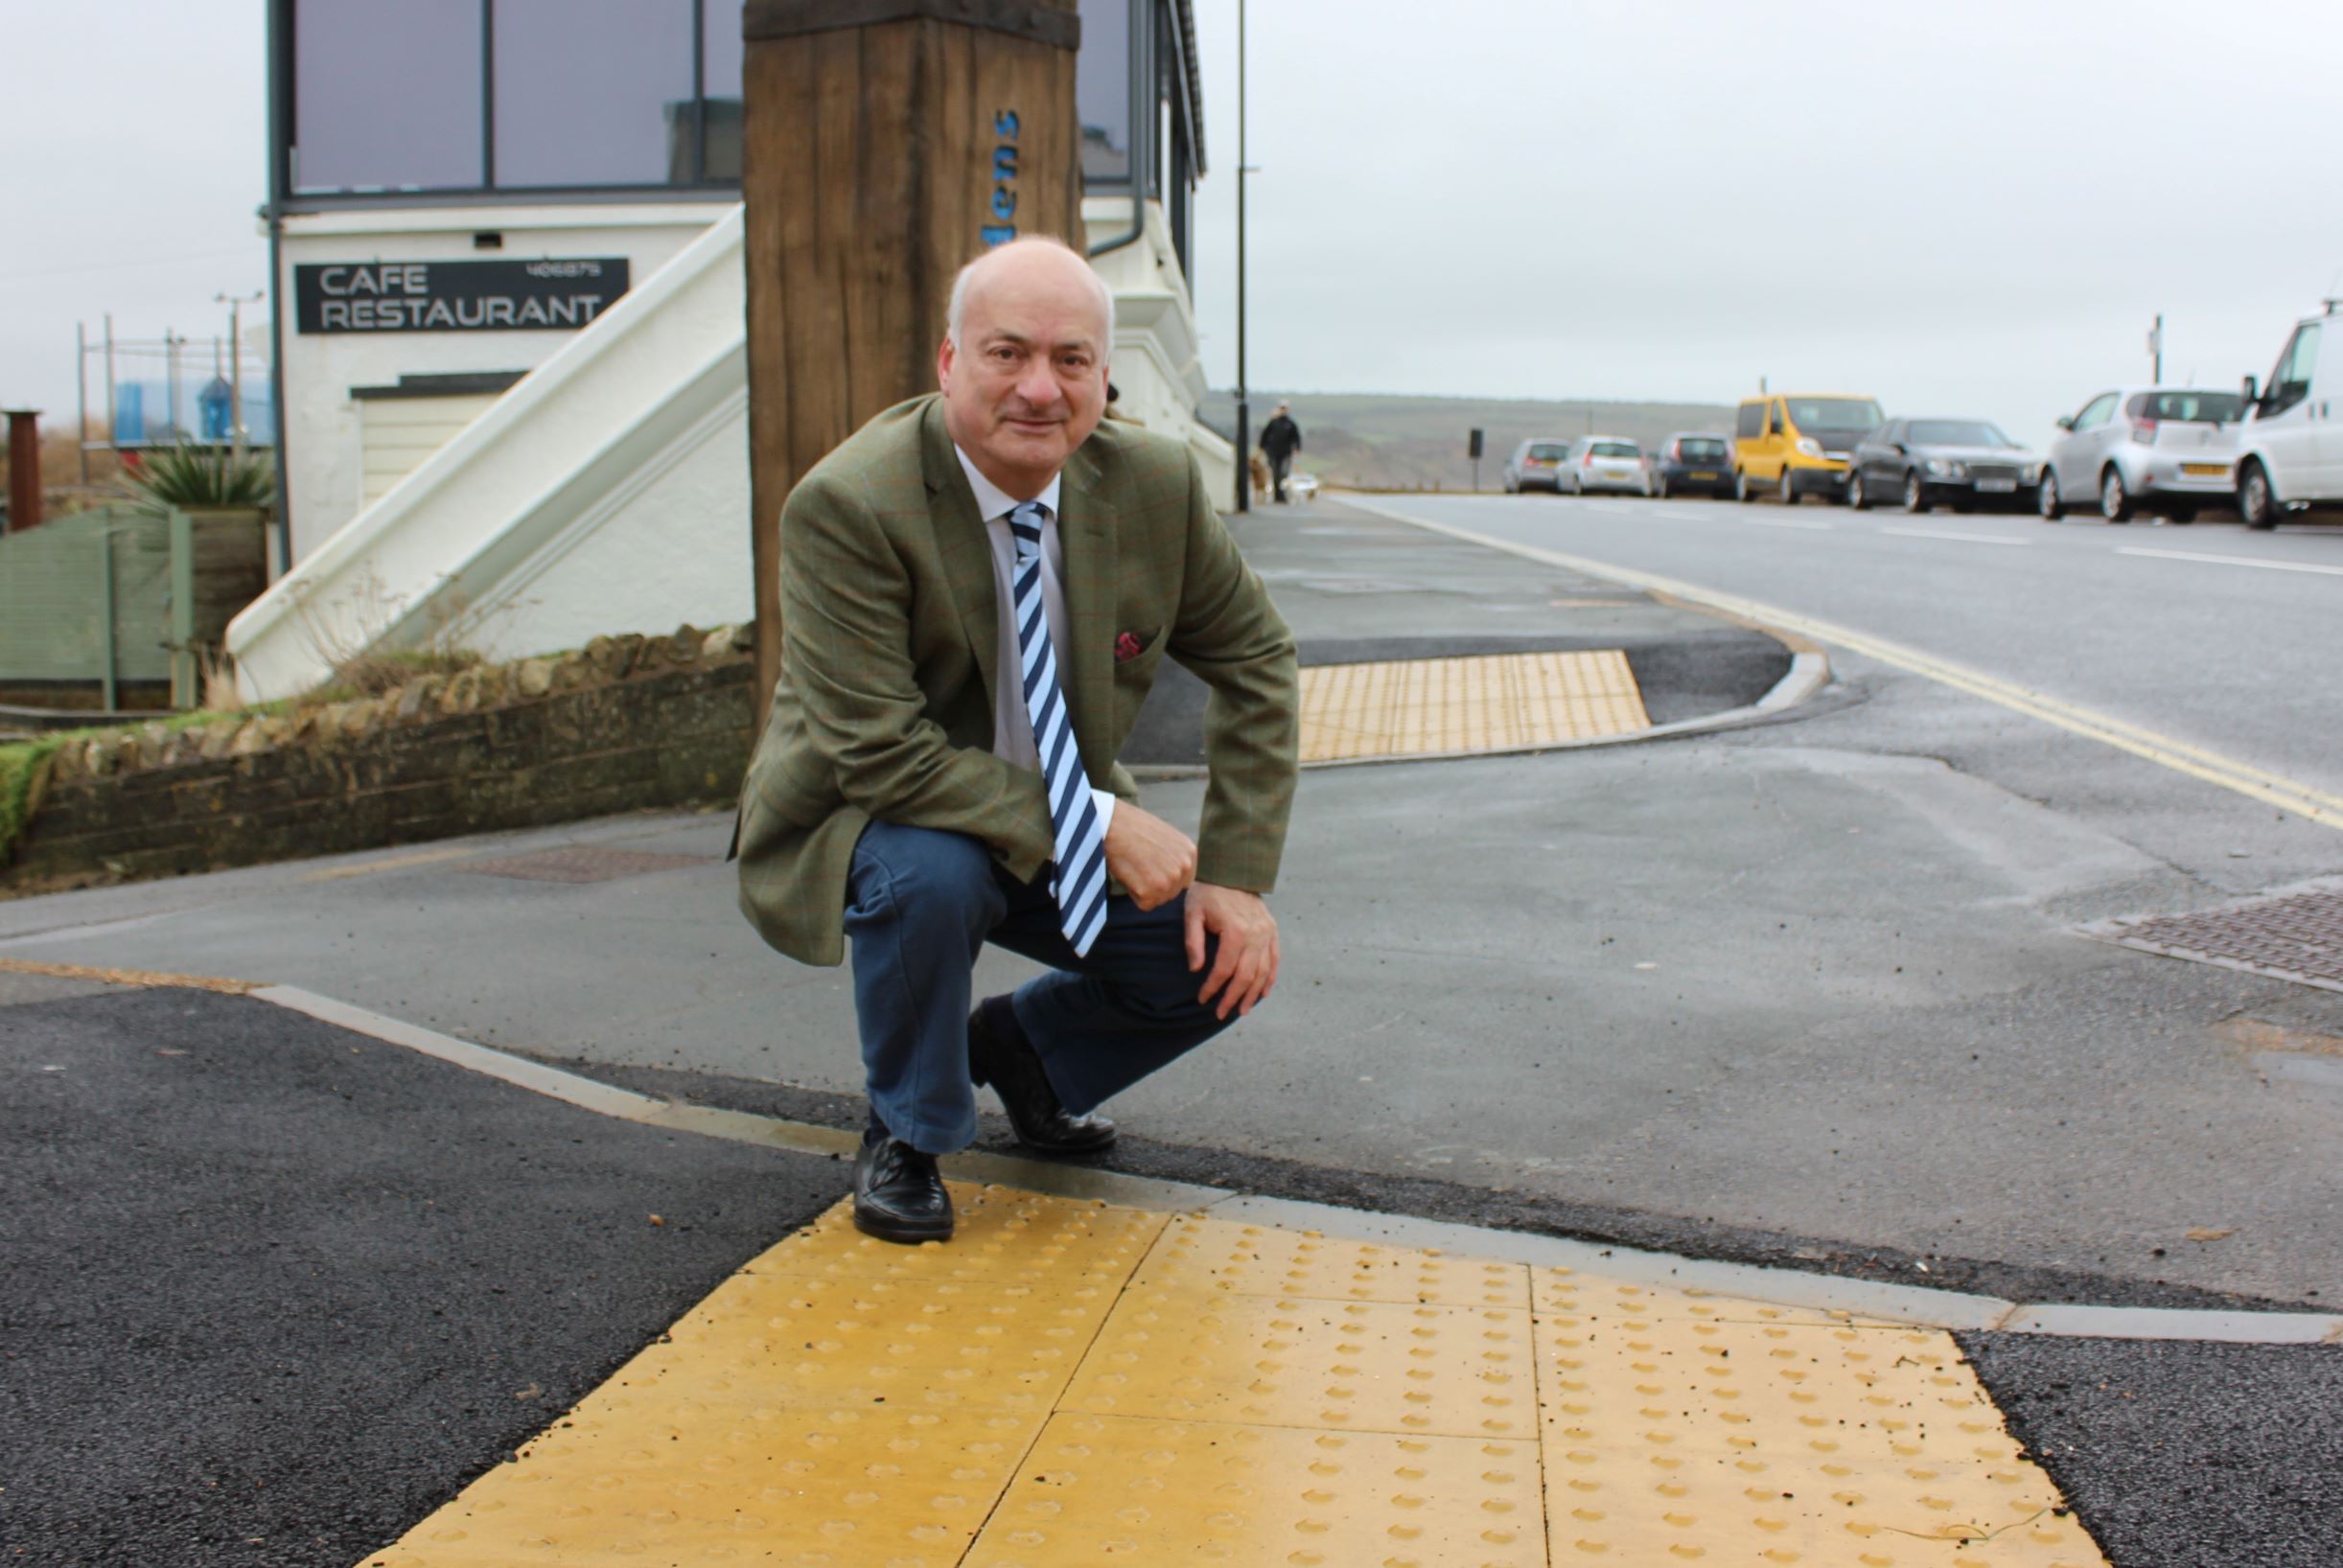 Photo shows a person (councillor Ian Ward) crouched down beside a tactile dropped kerb near the edge of the road